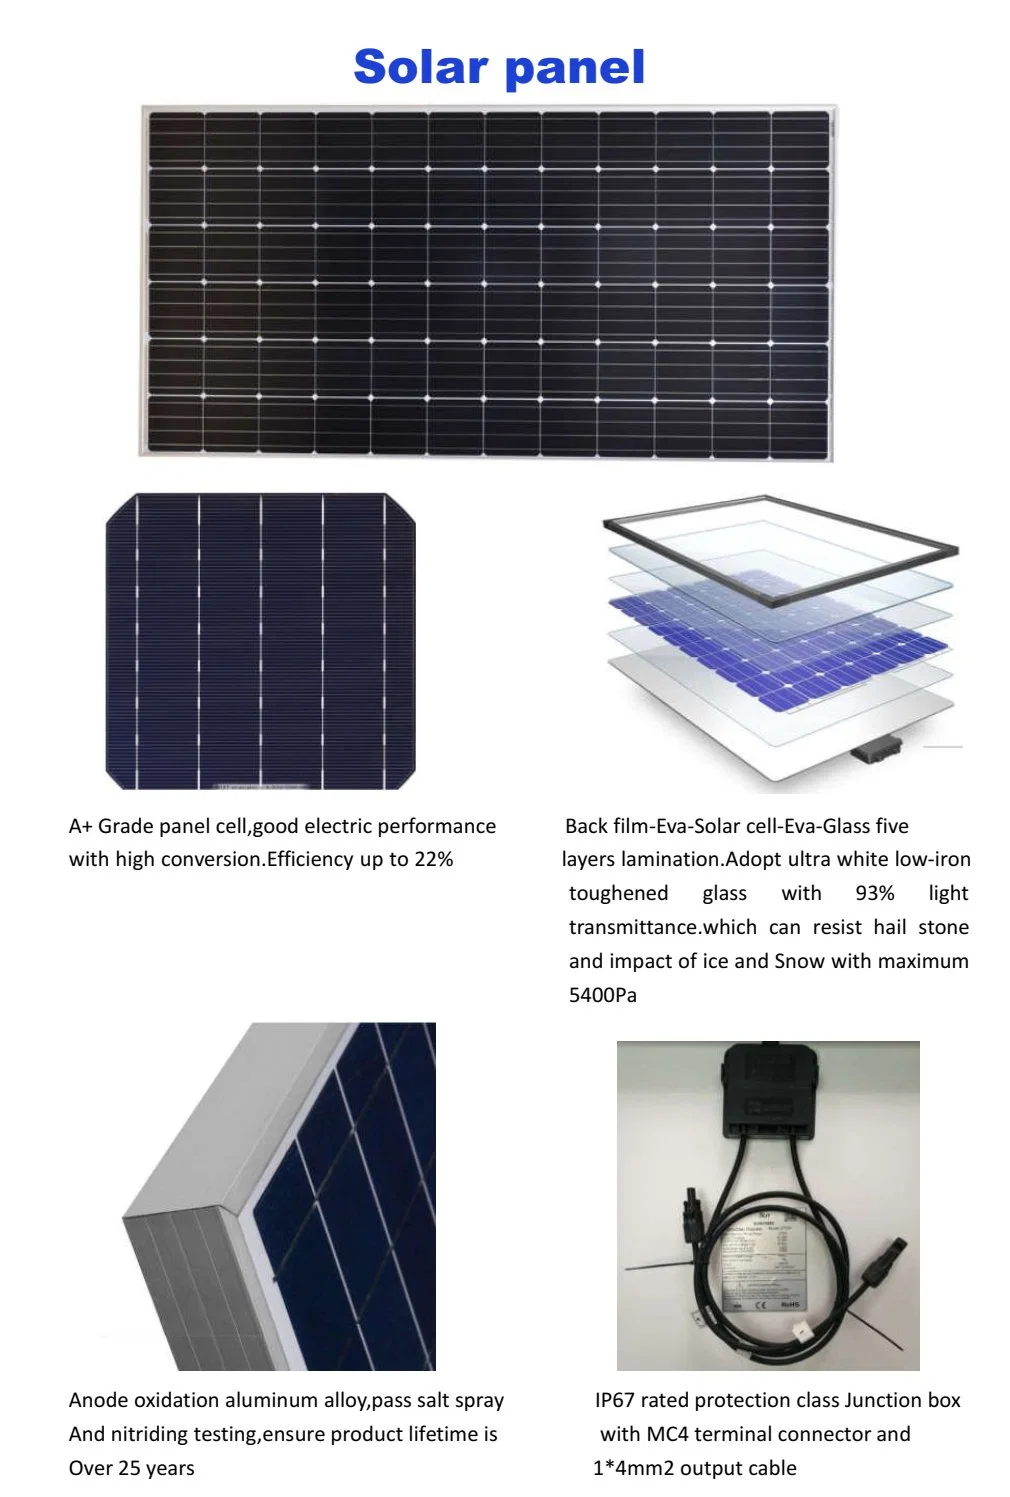 Residential 15 Kw 15000W Complete Home off-Grid Solar Energy System/Home Solar Panel Kit